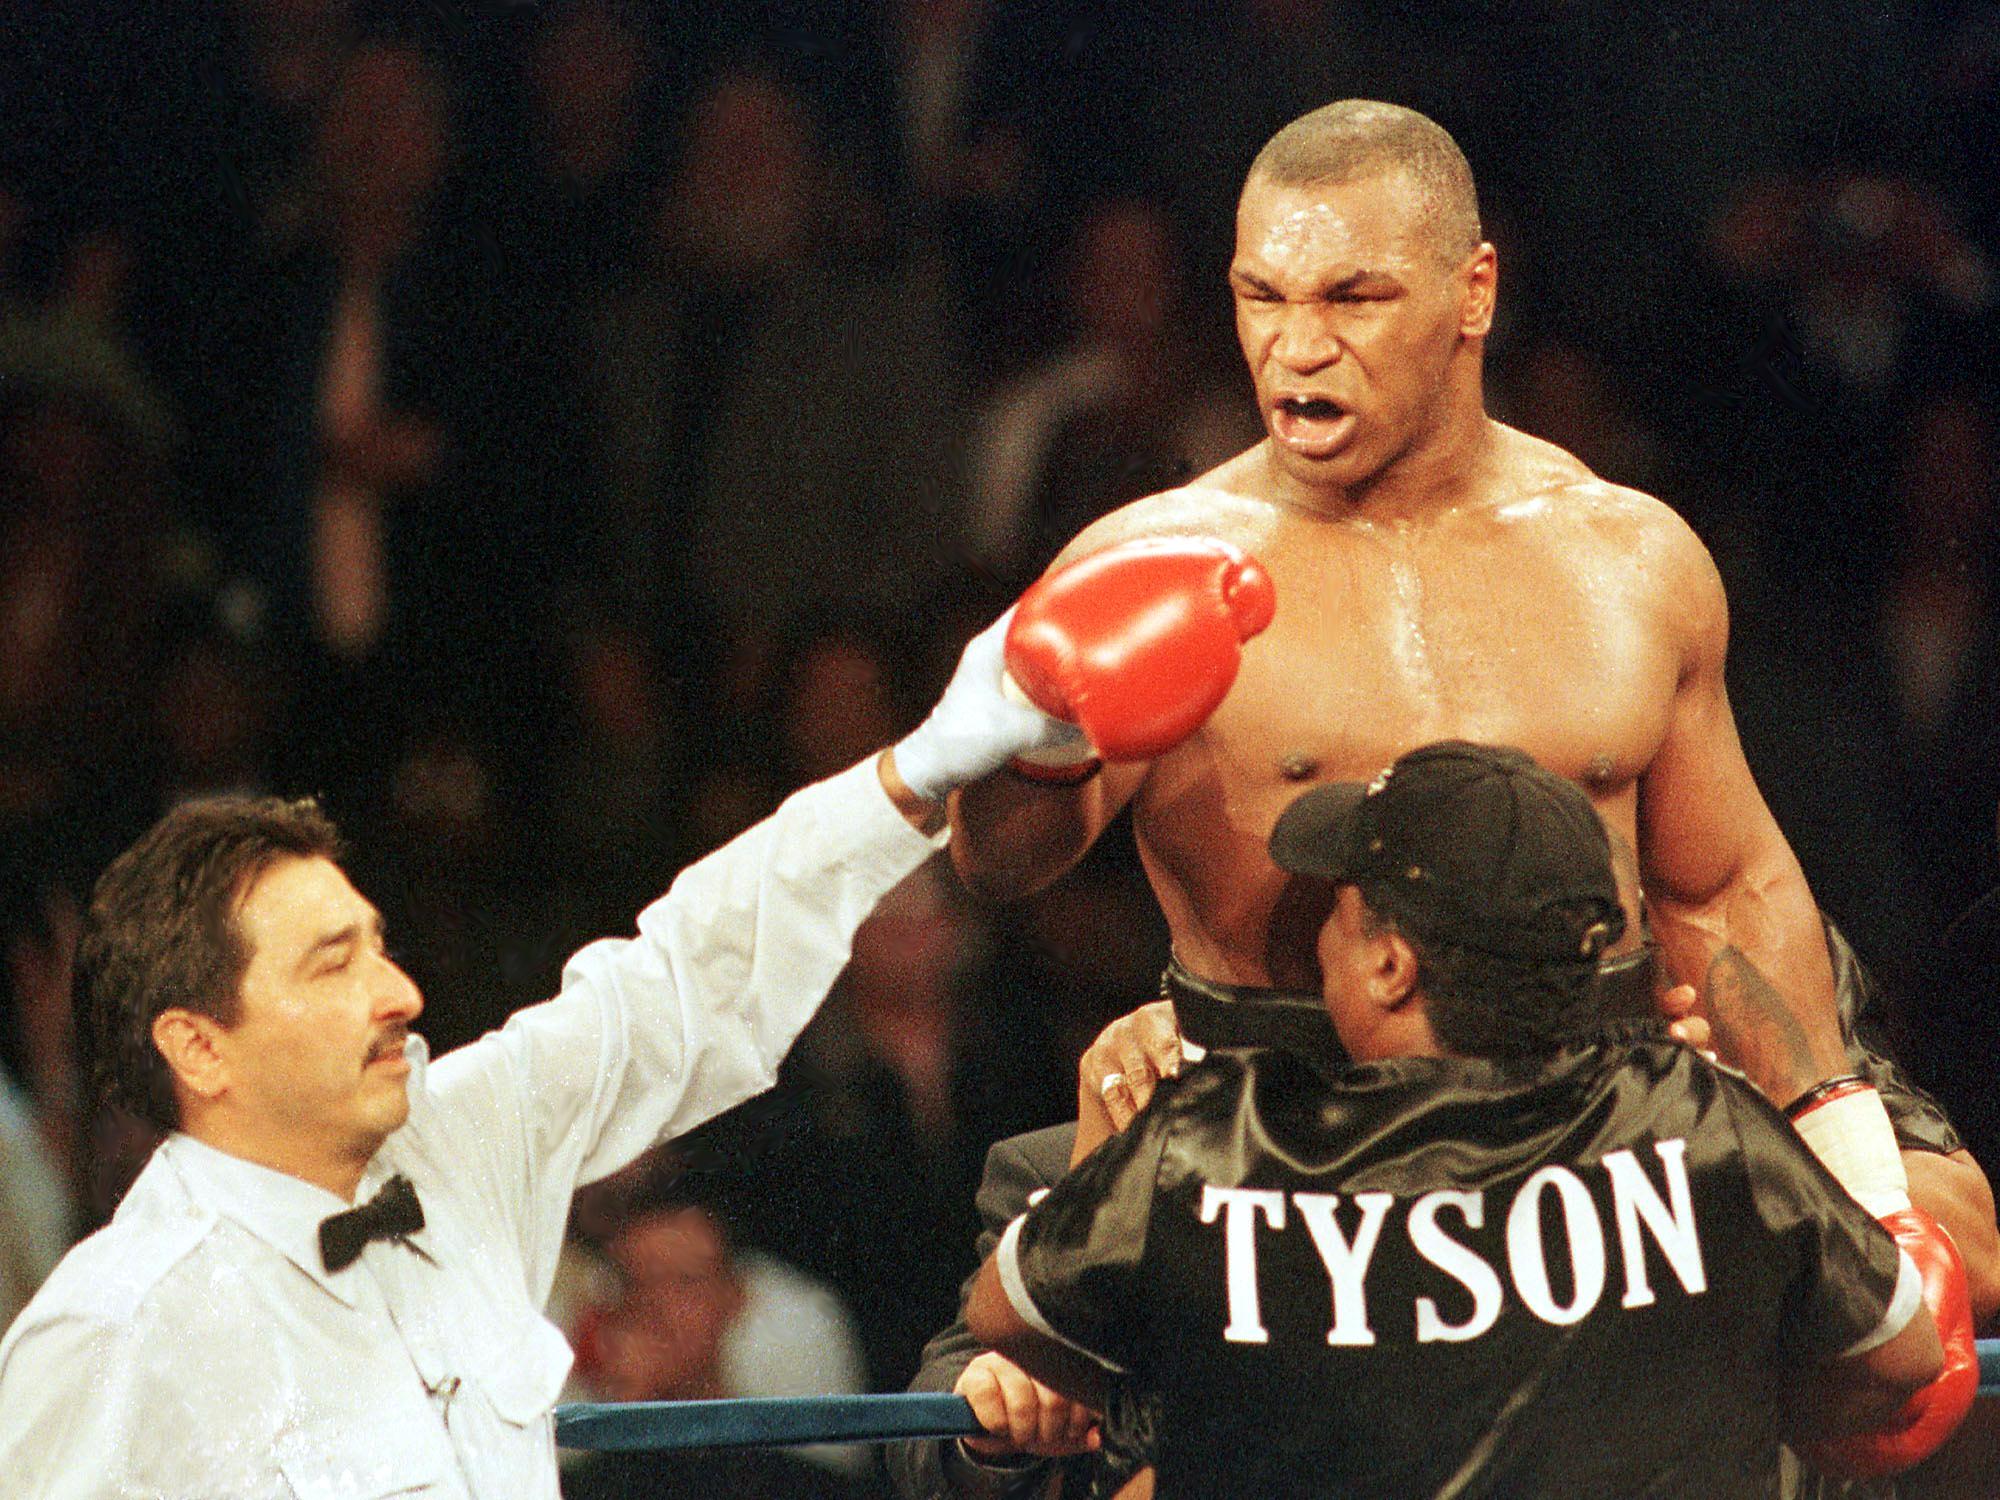 Mike Tyson’s Lone Positive as a Child Was Getting Free Lunch